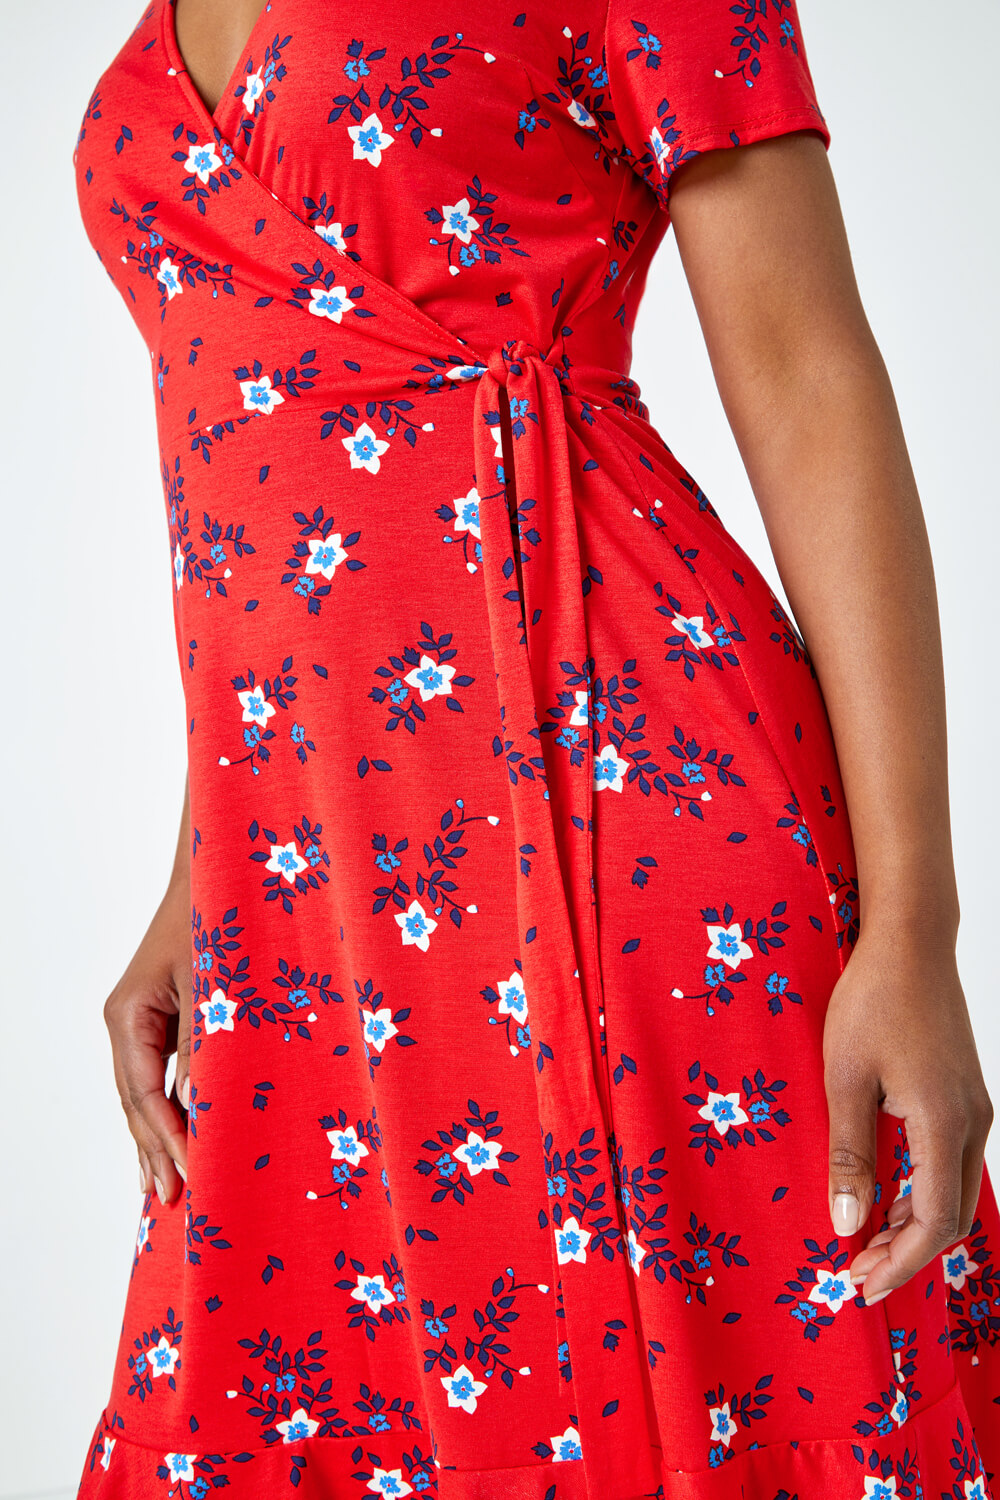 Red Petite Floral Stretch Wrap Dress, Image 5 of 5